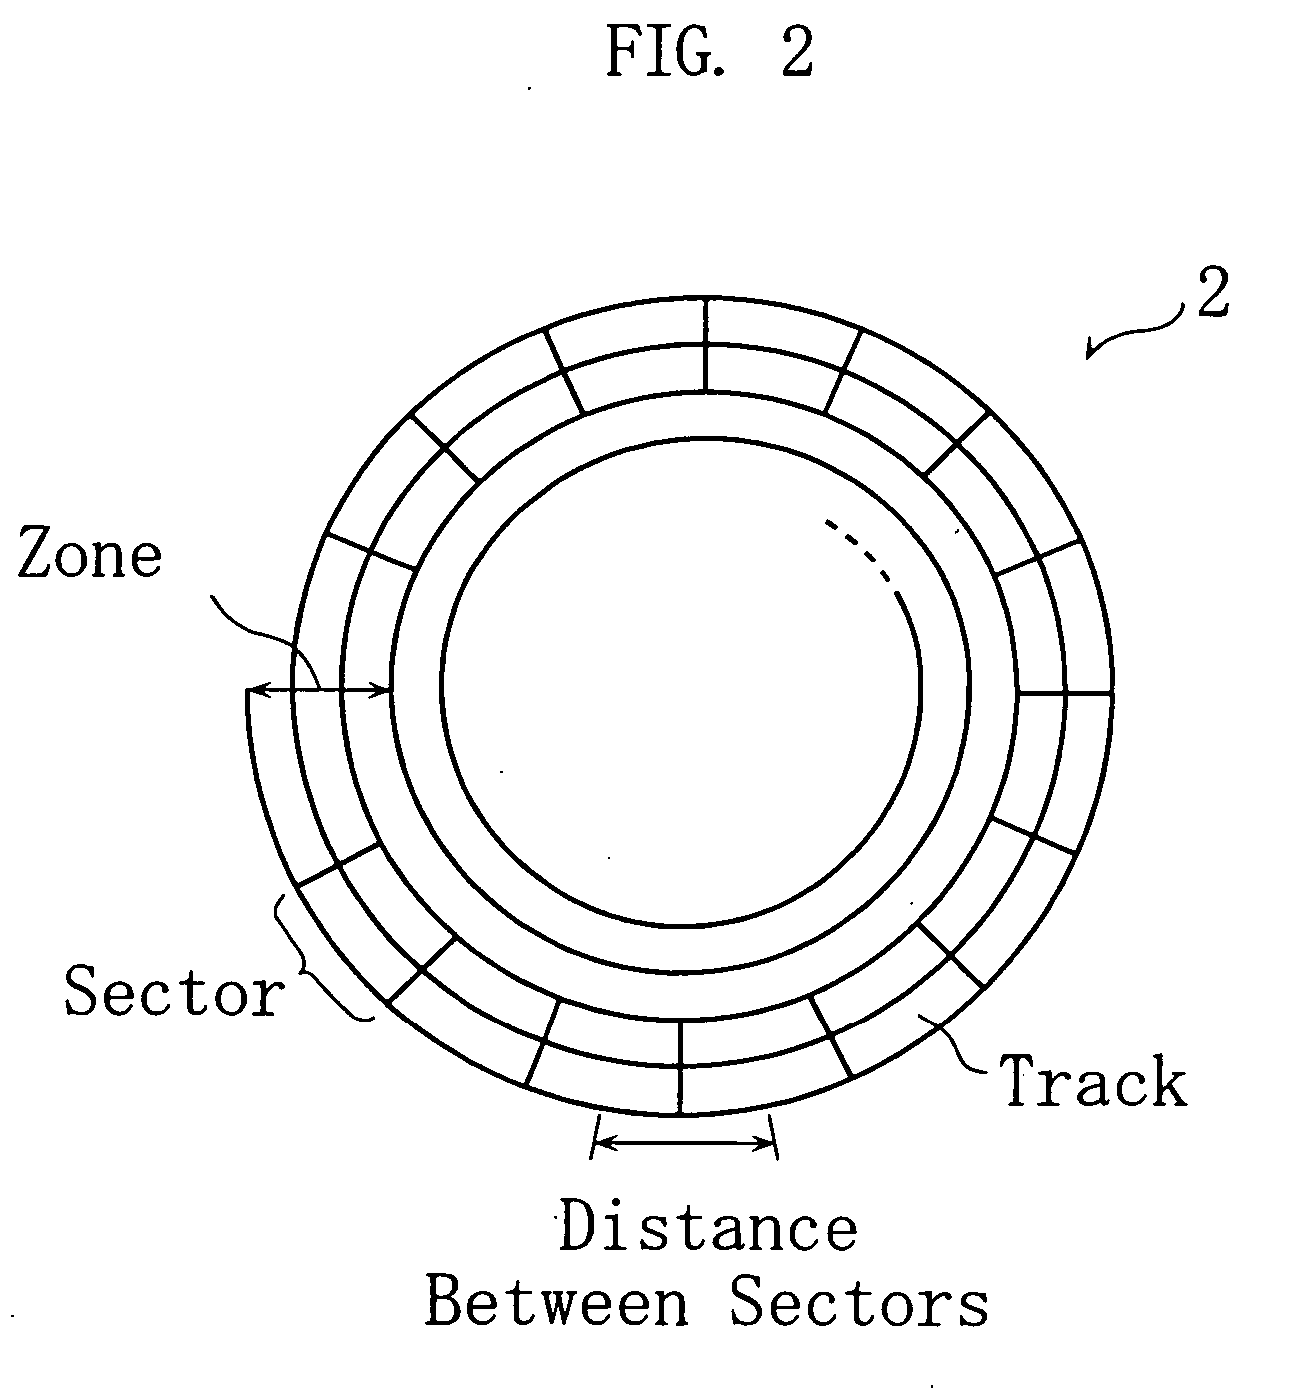 Magneto-optical disc device and method for writing data on magneto-optical disc